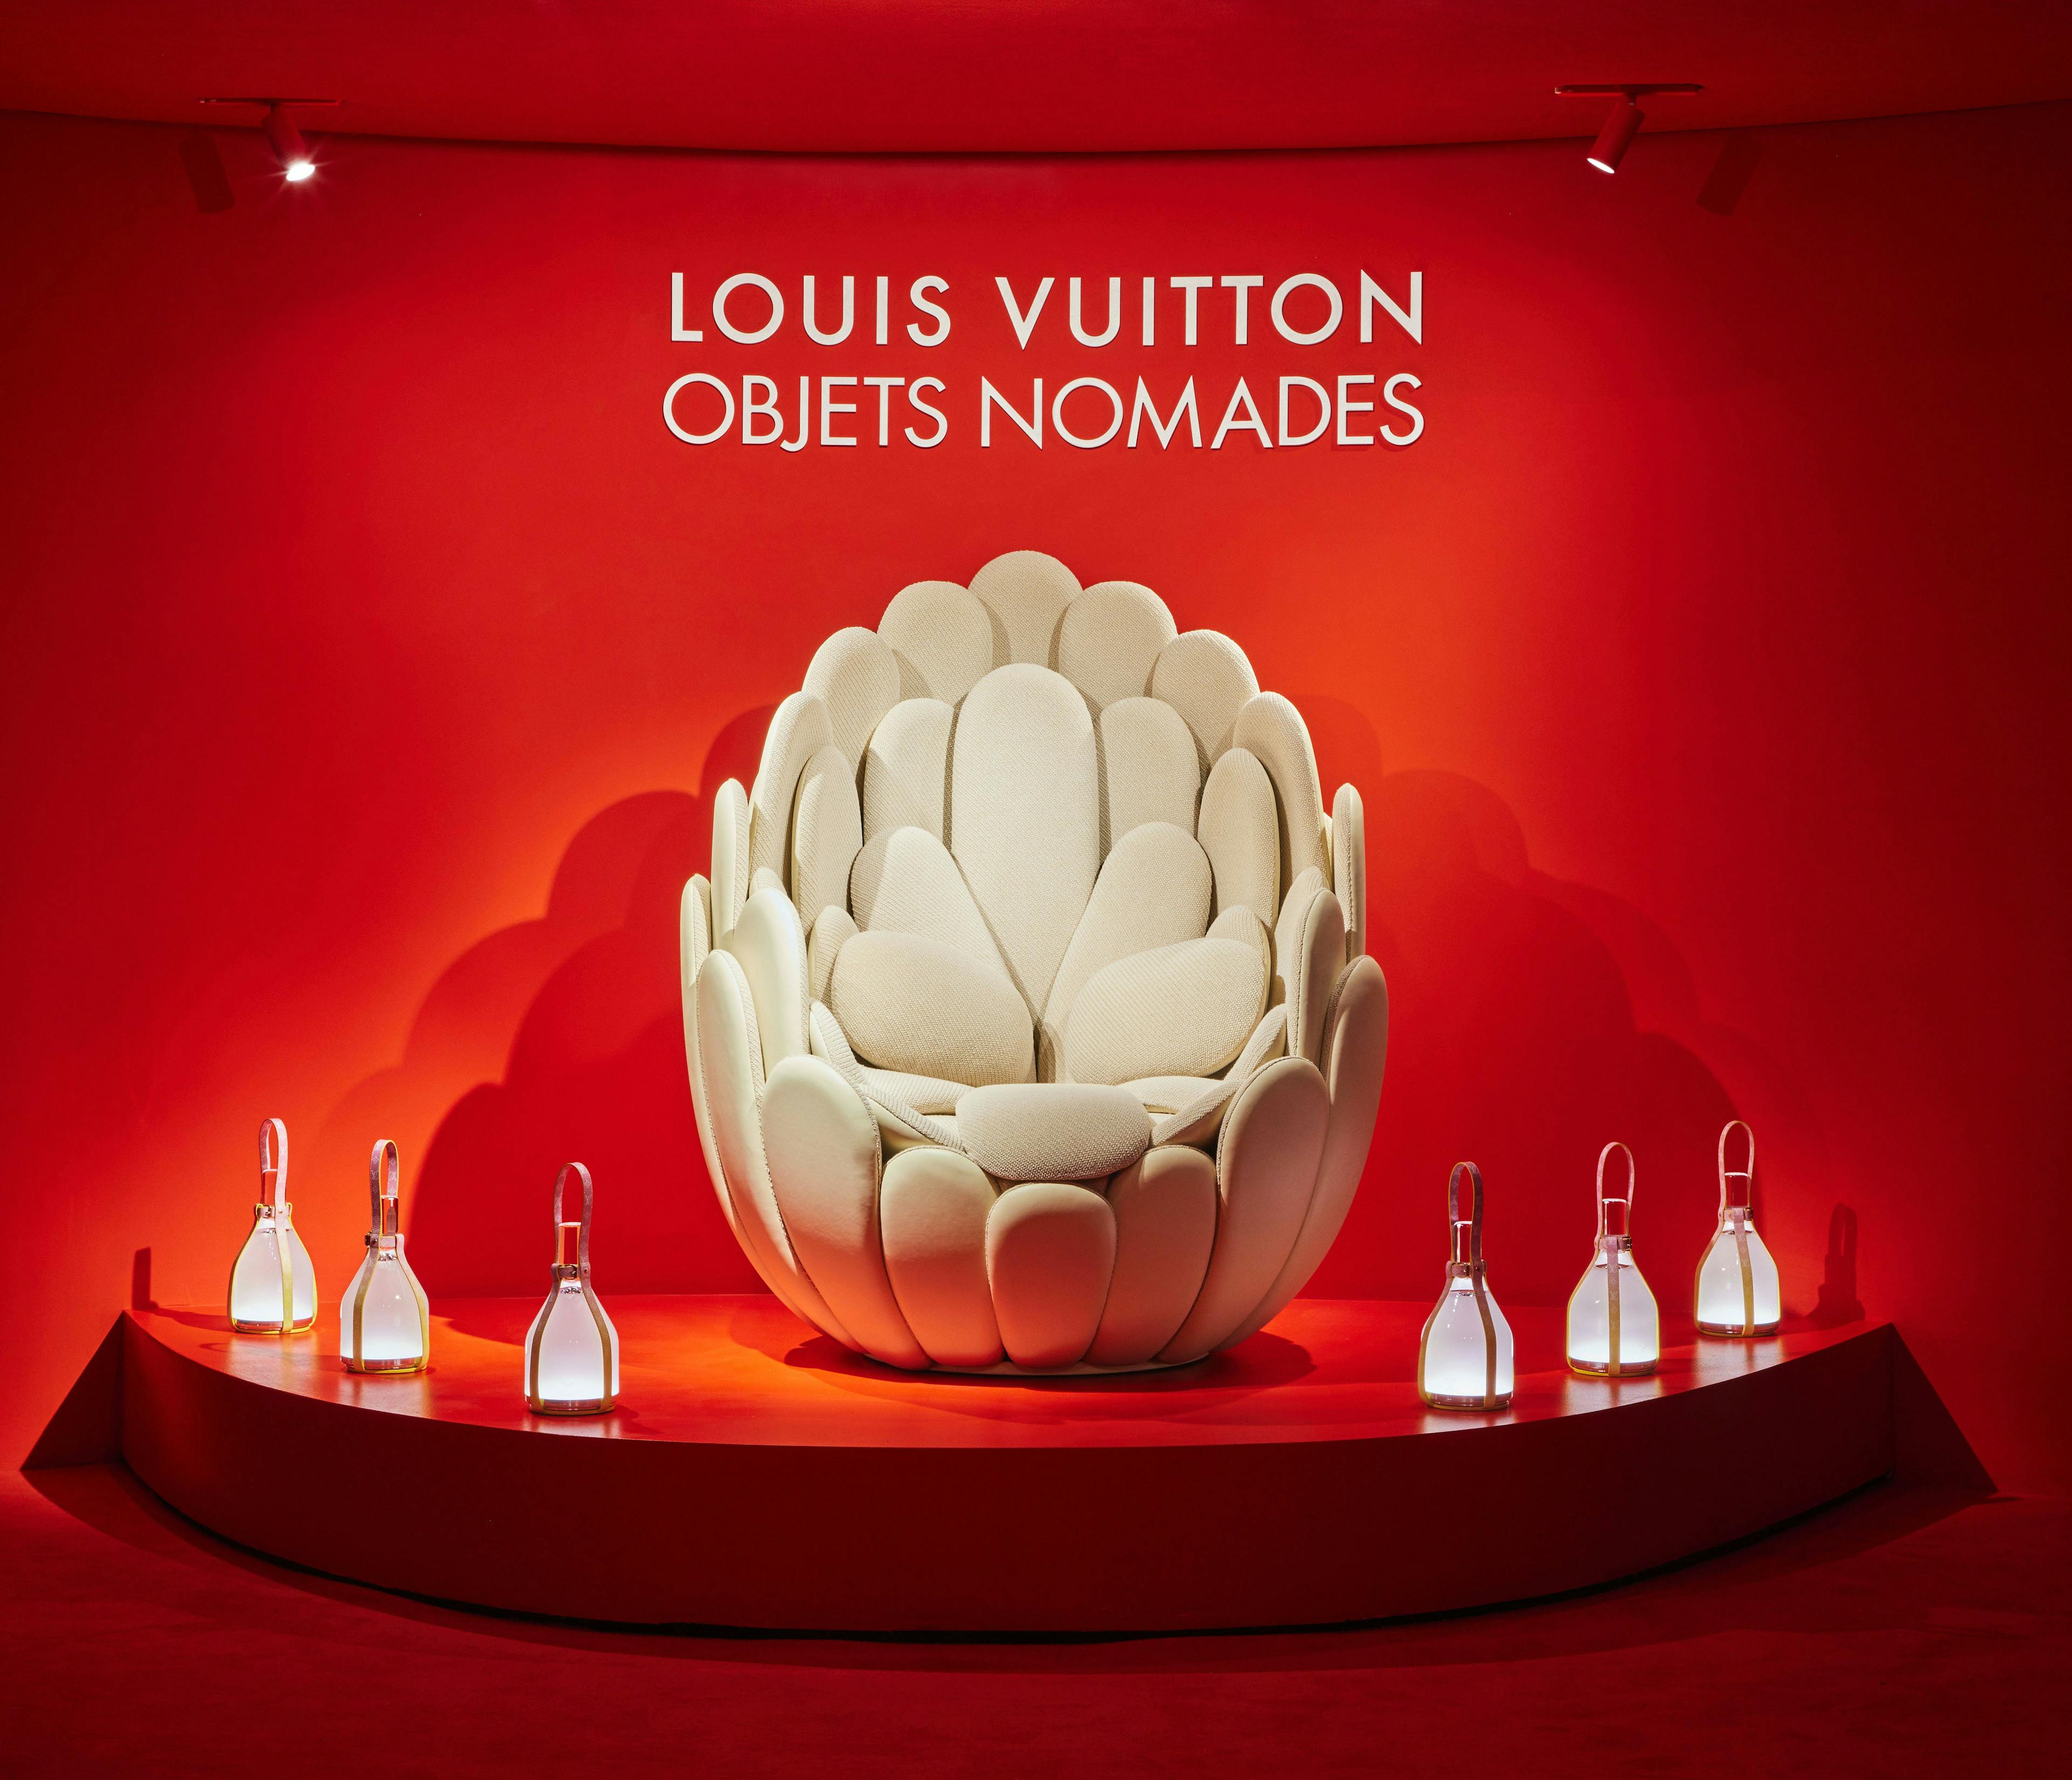 Louis Vuitton's Objets Nomades Collection Lands in Houston